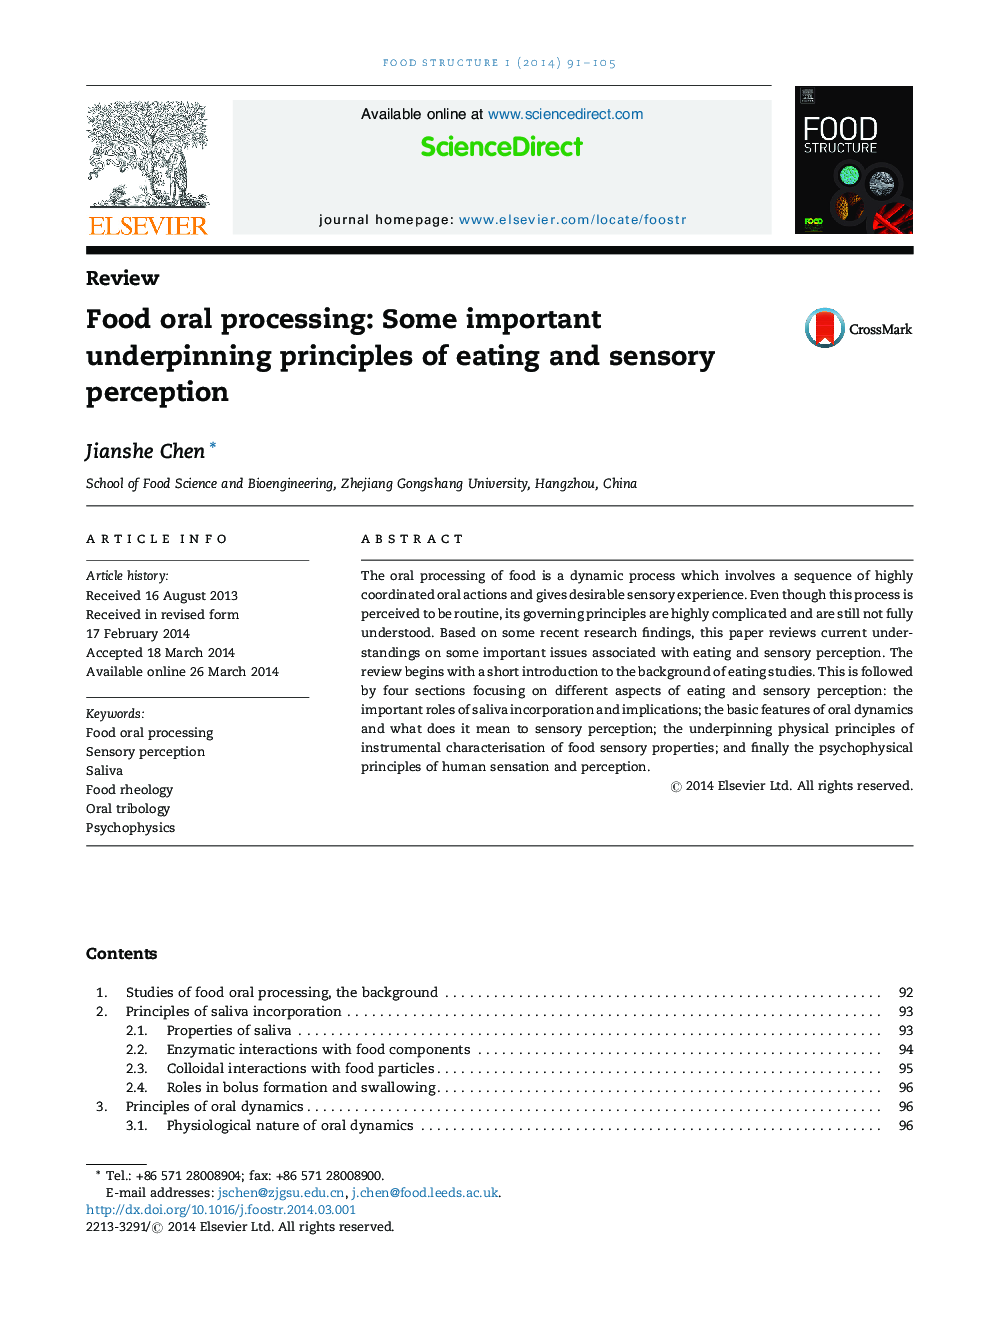 Food oral processing: Some important underpinning principles of eating and sensory perception